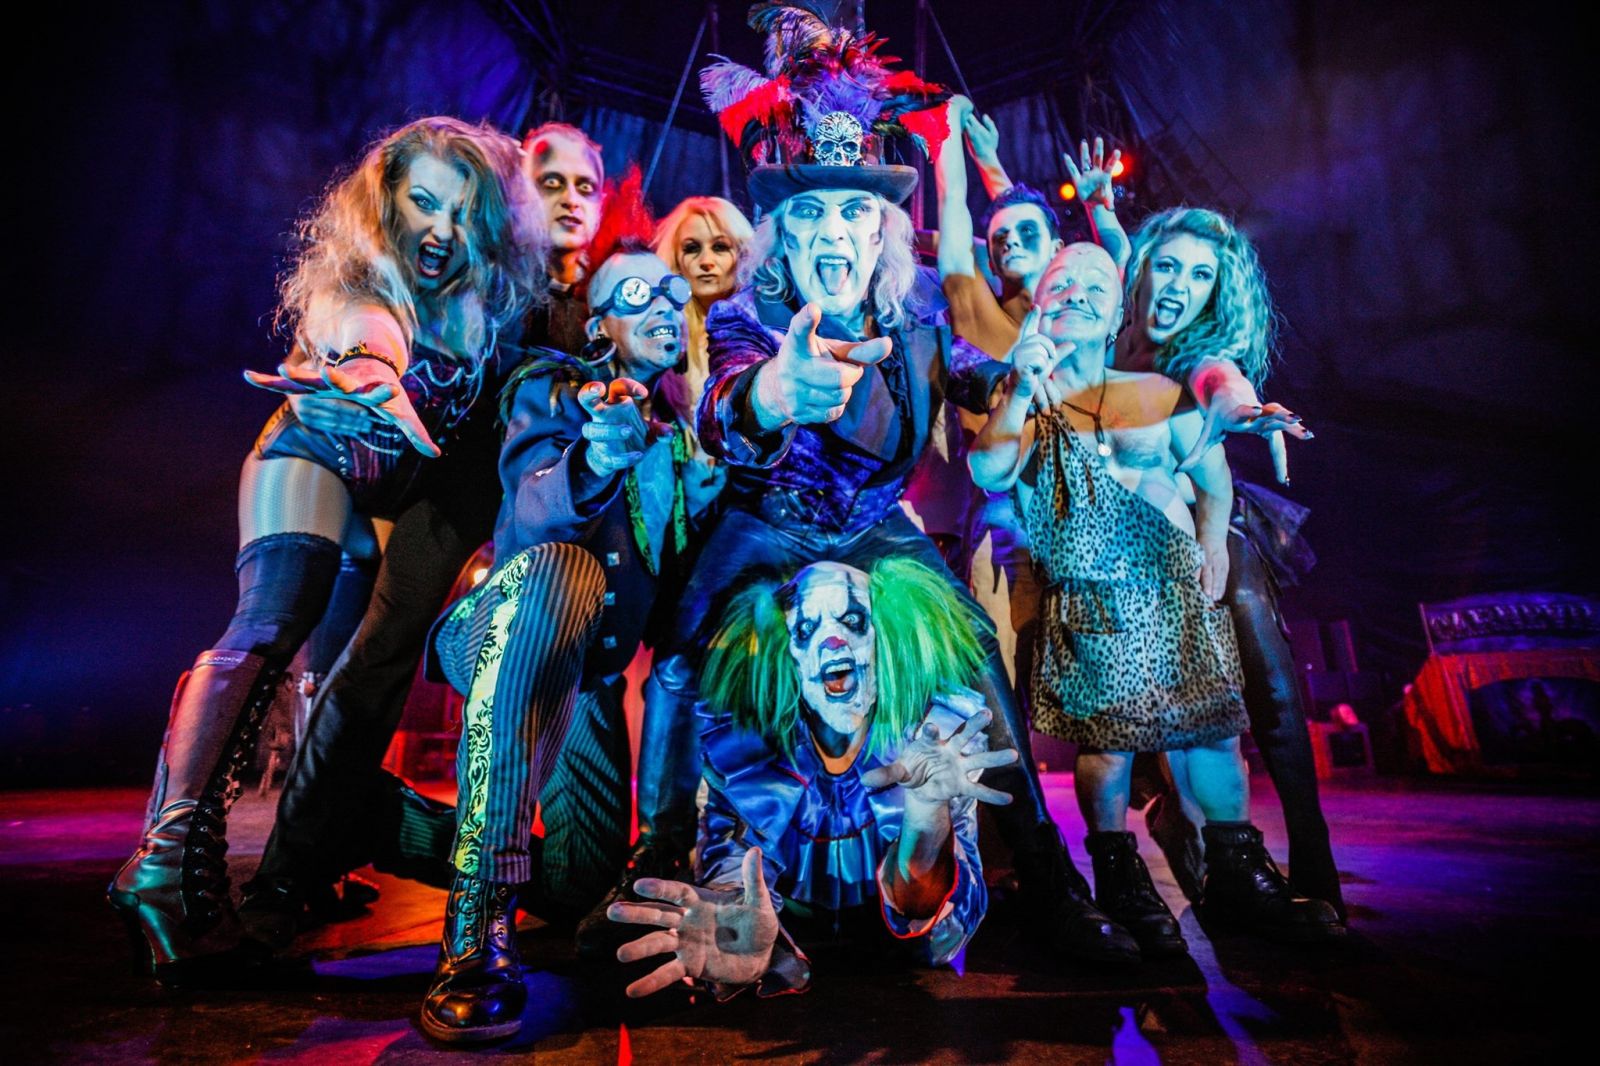 The Circus of Horrors at The Bristol Hippodrome on 10 January 2017